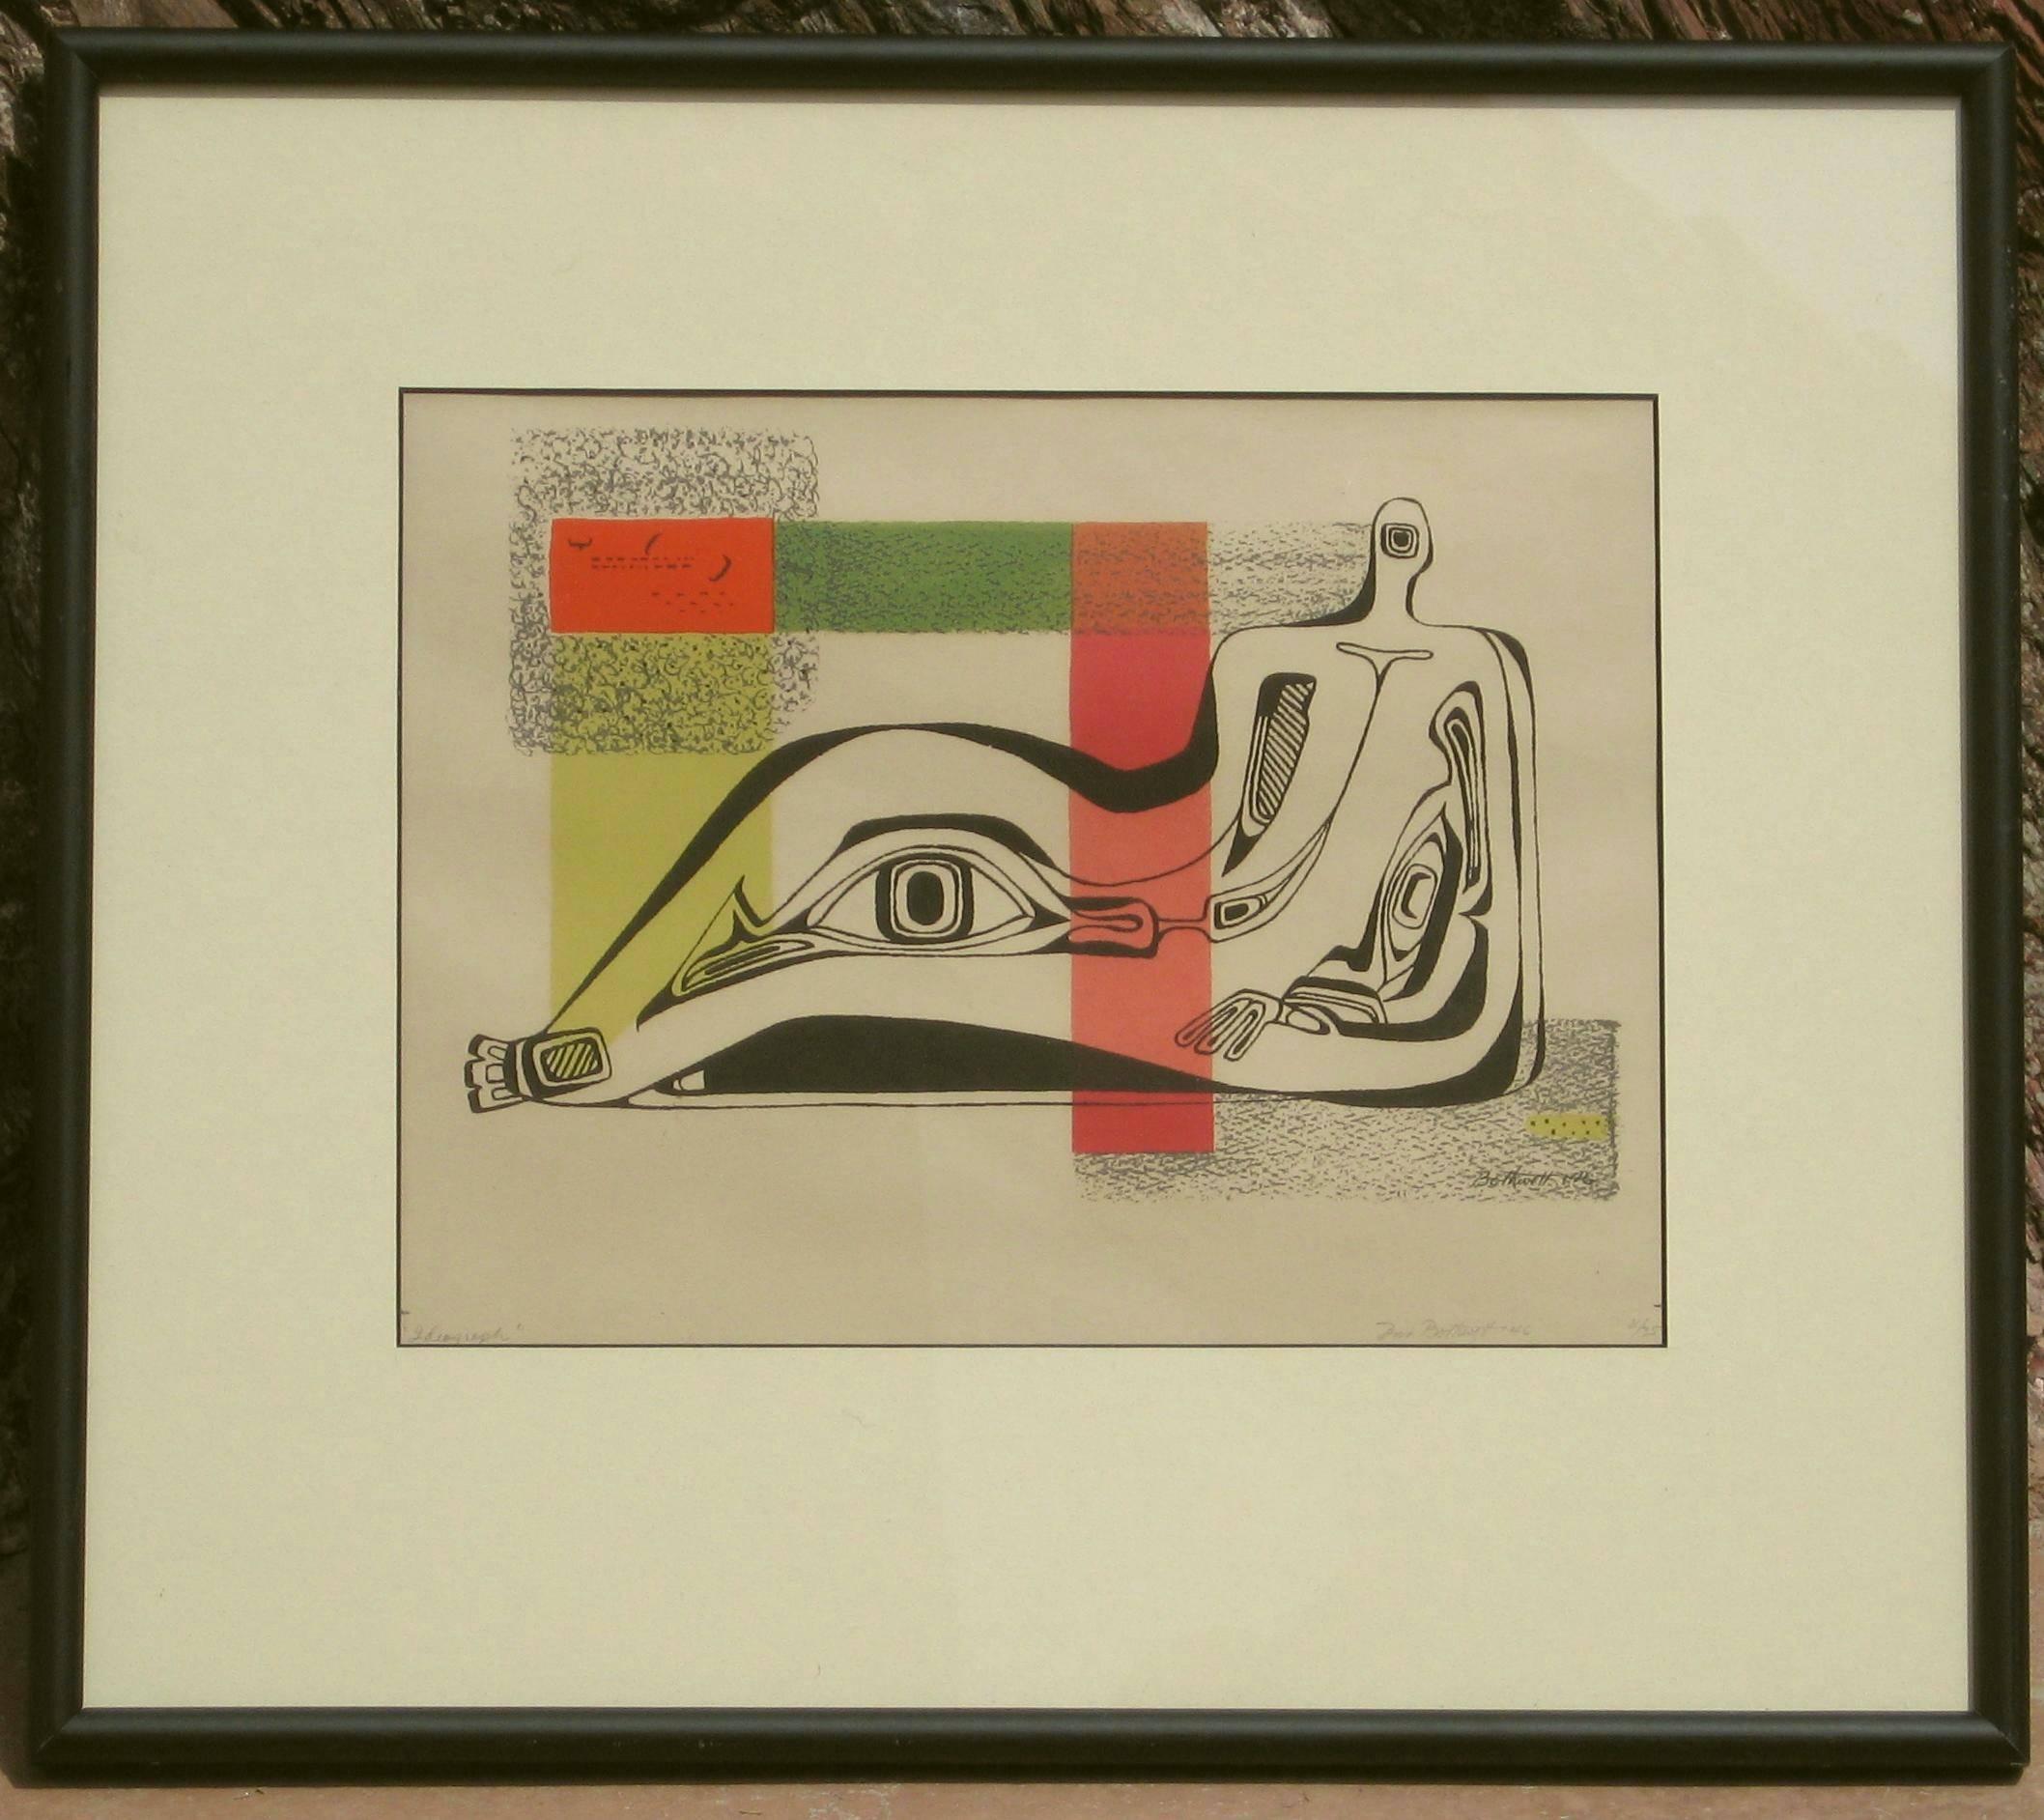 California modernist Dorr Bothwell (1902-2000) original serigraph.
Signed in pencil lower right and dated 1946.
Edition size is also seen in pencil lower right: 8 of 35.
Pencil titled lower left: 